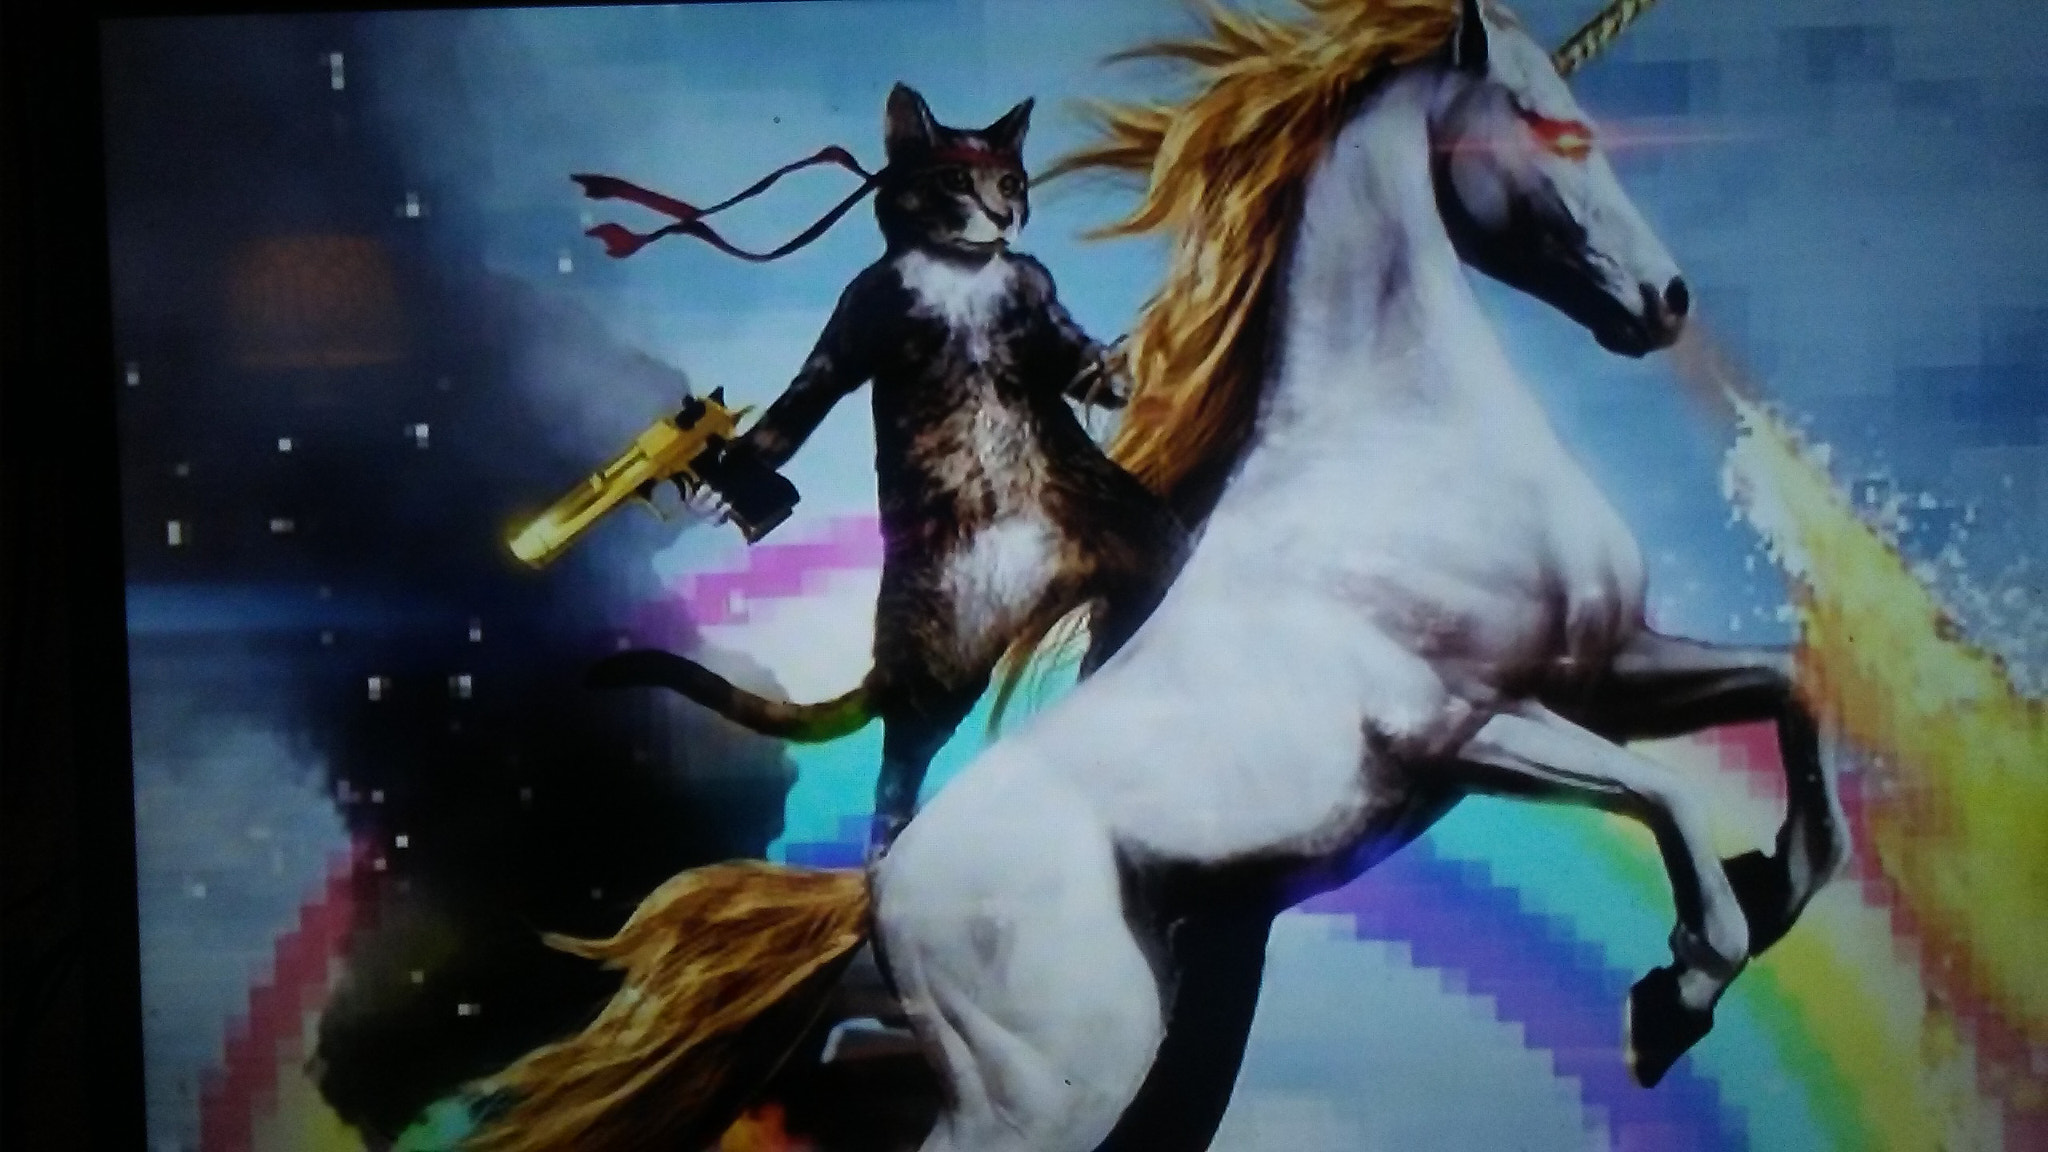 LG M1 sample photo. A cat riding a fire breathing unicorn photography